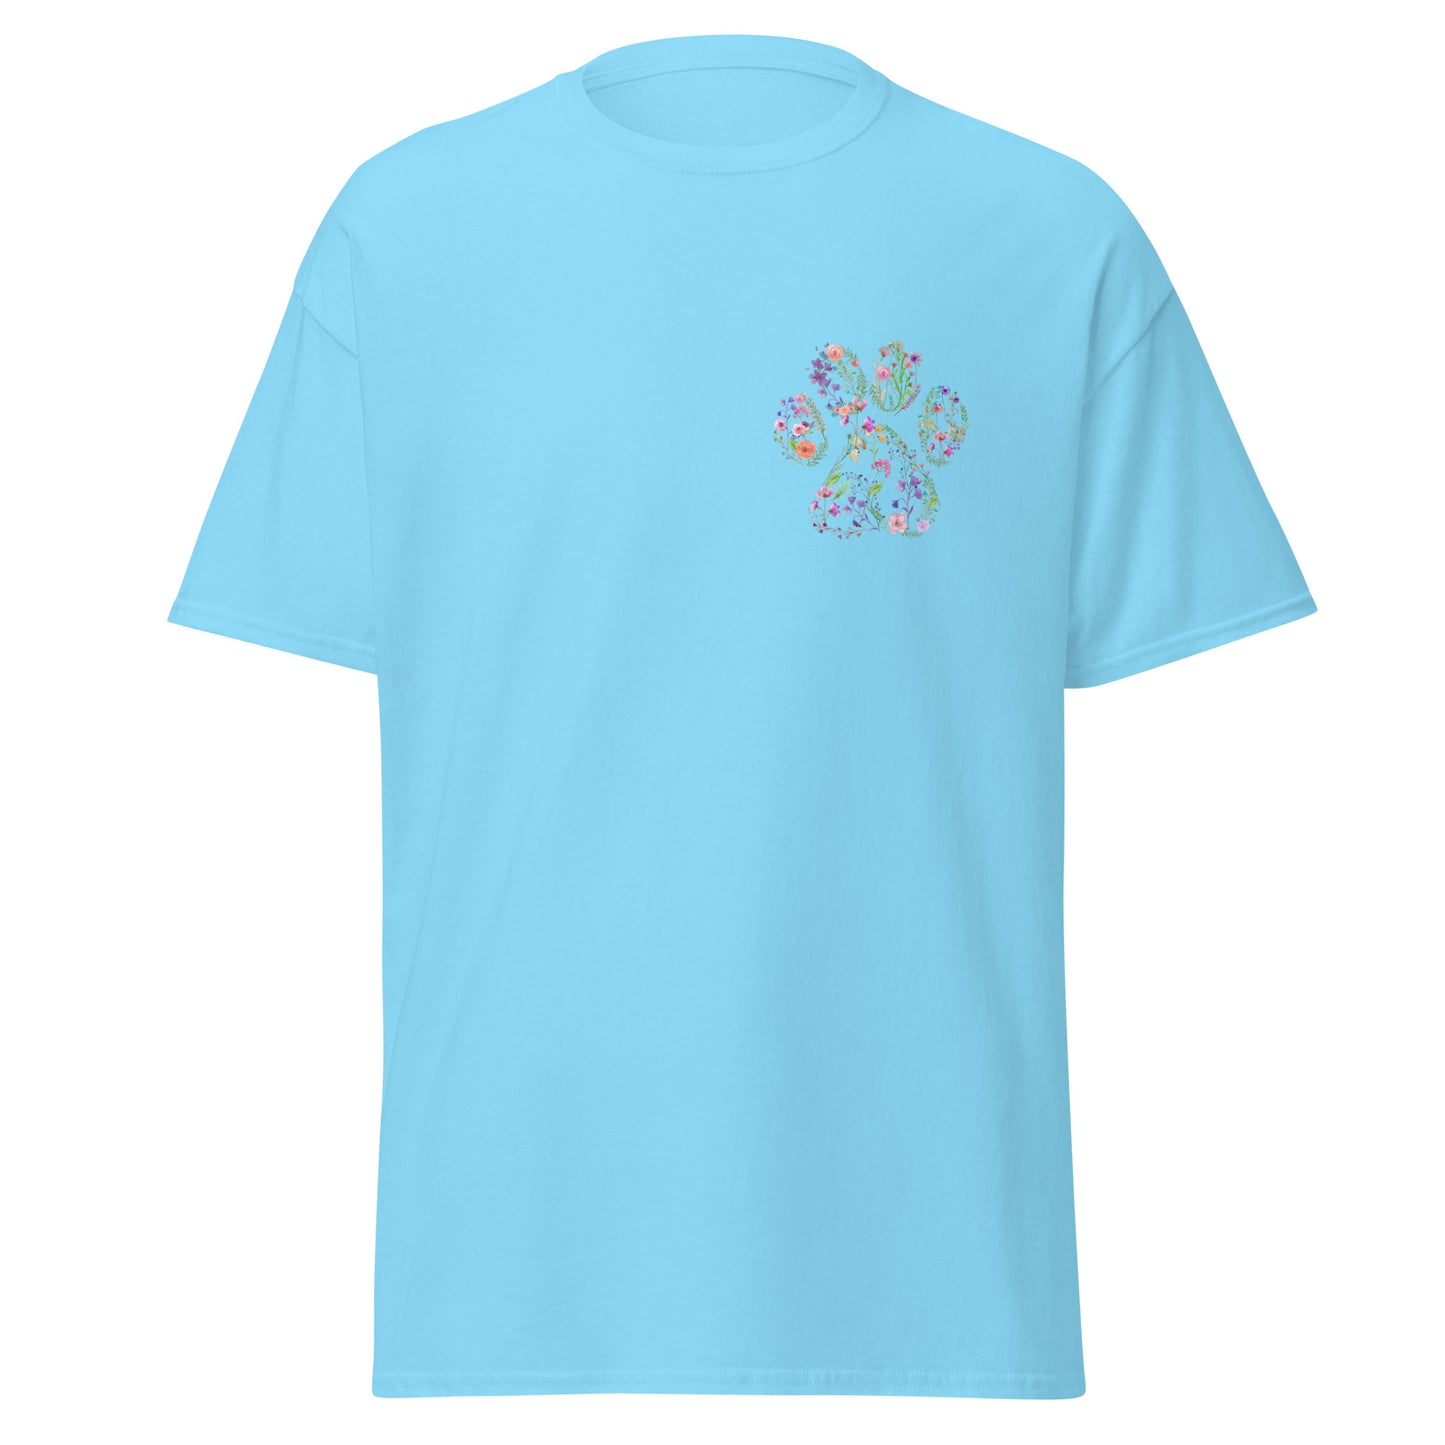 The Spring Vibes and Saving Lives Tee